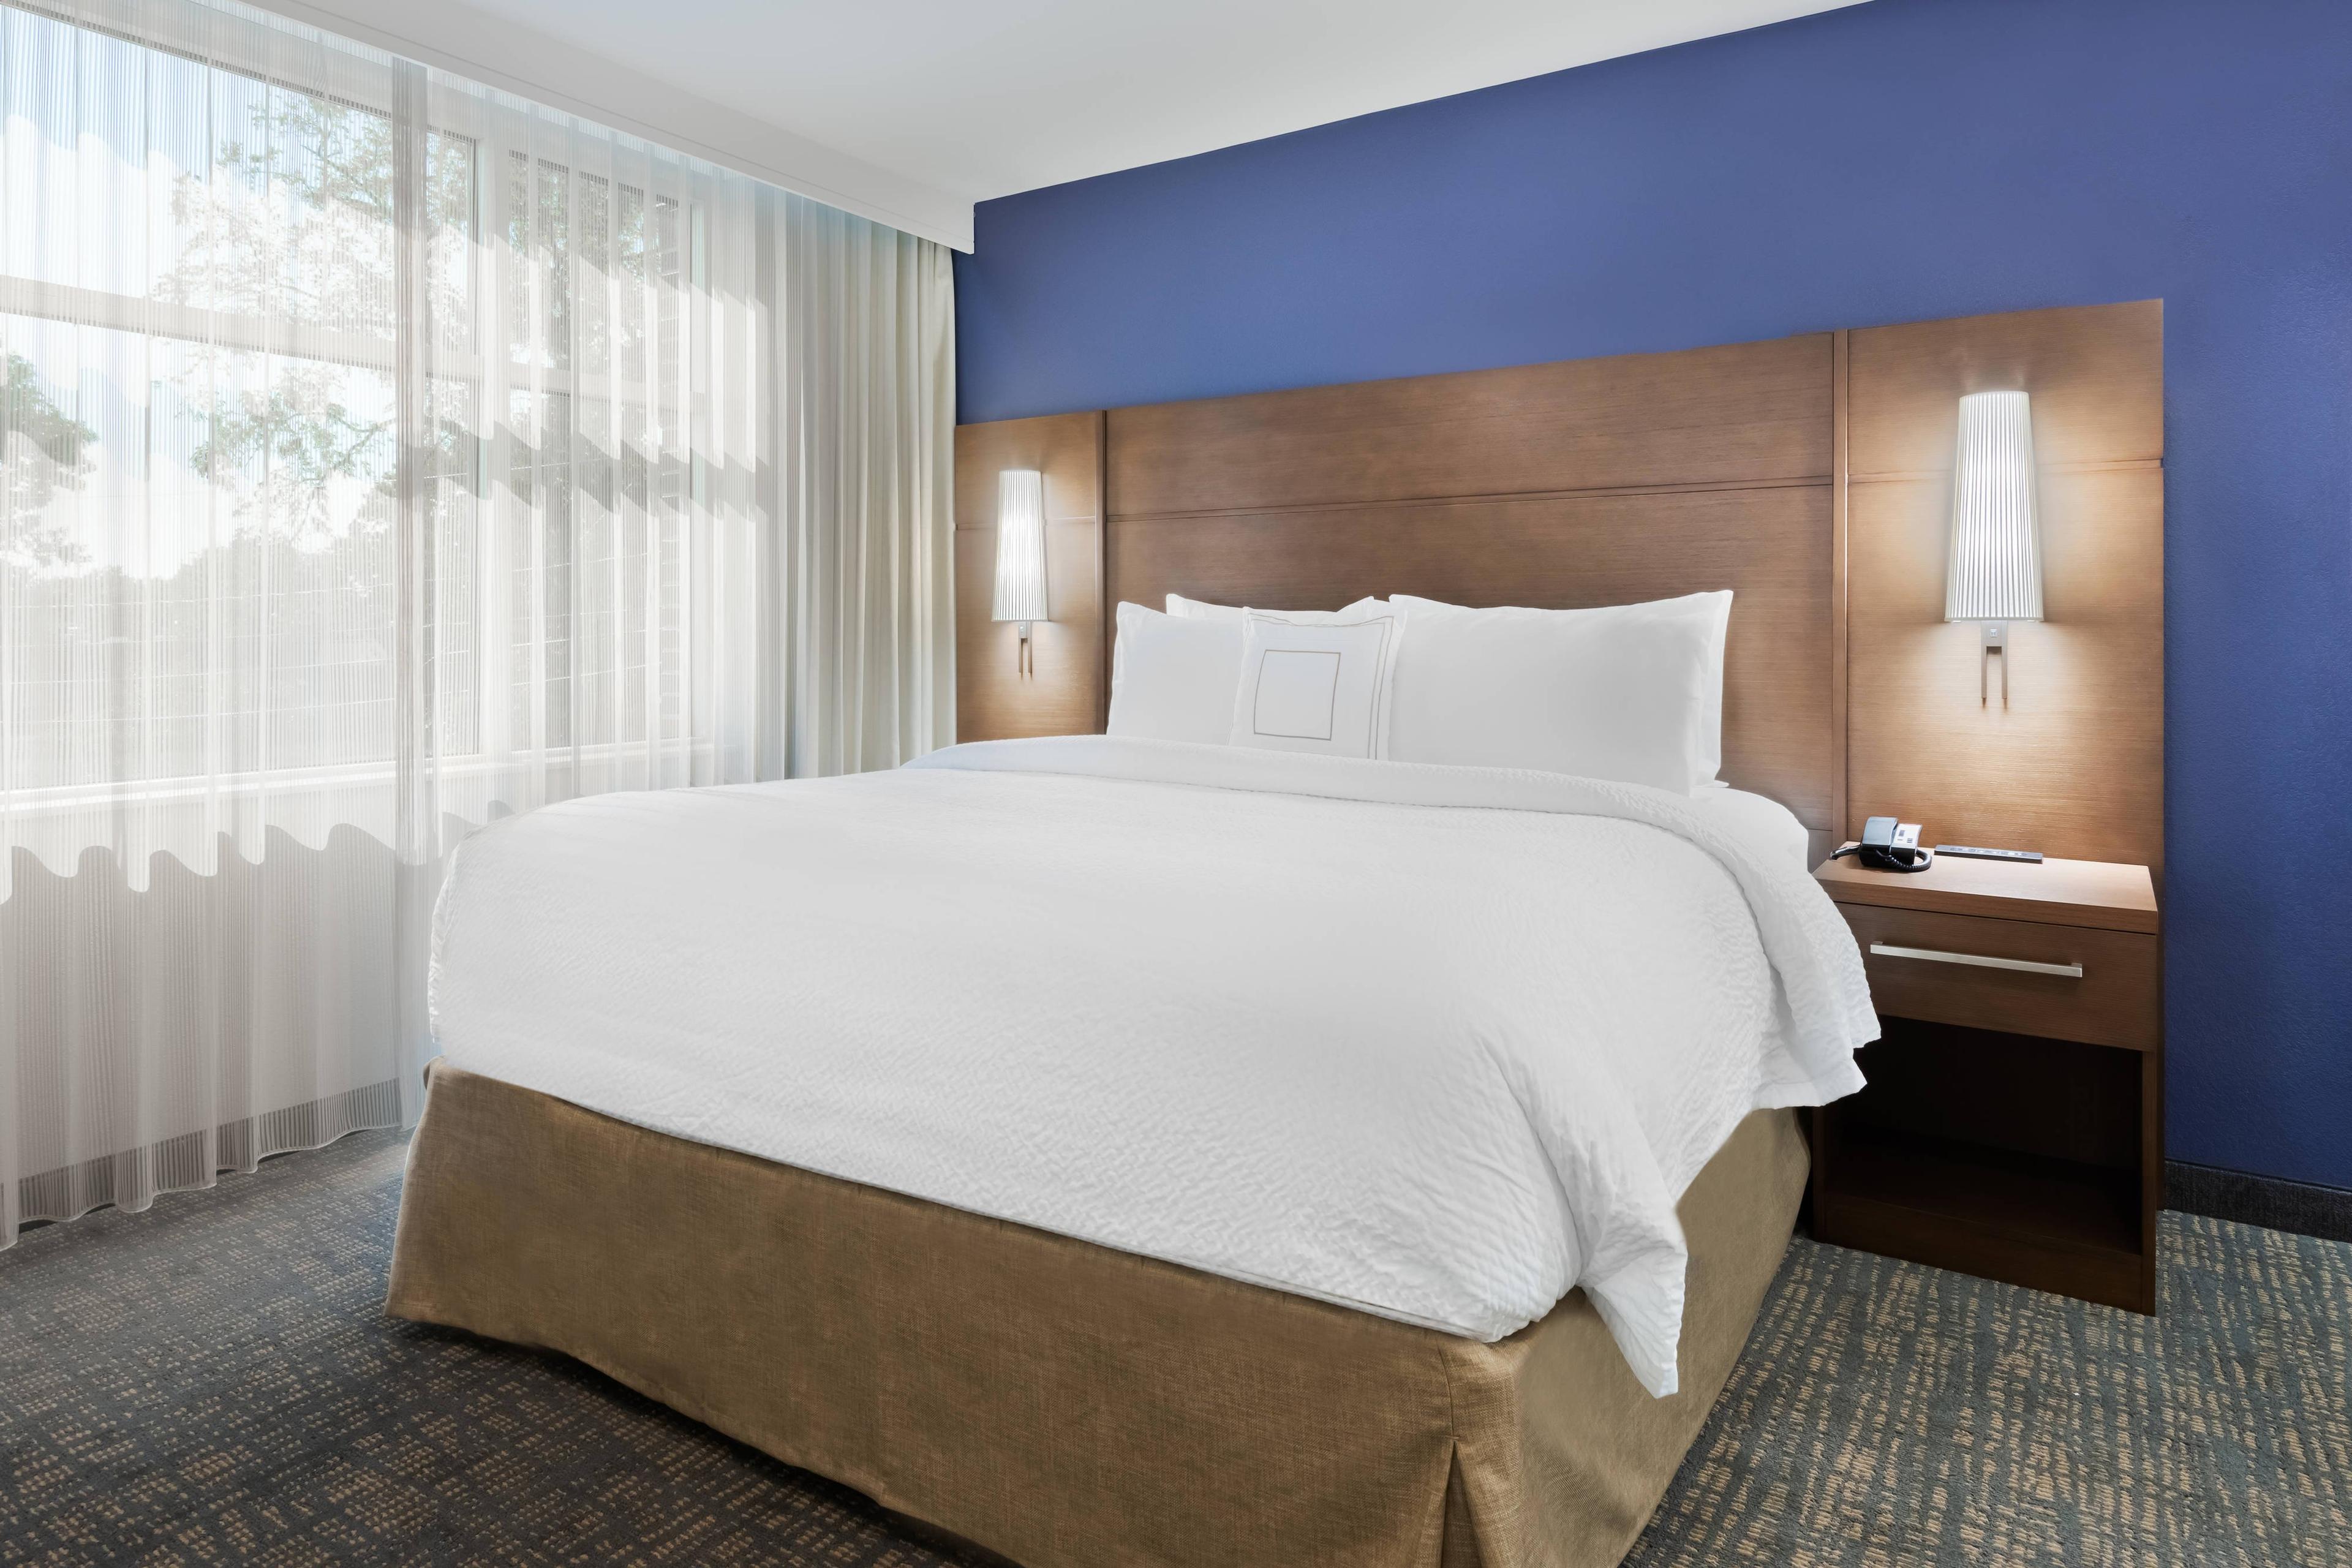 Get a great night's rest on our comfortably soft beds. Charging ports are available next to the bed for your convenience.